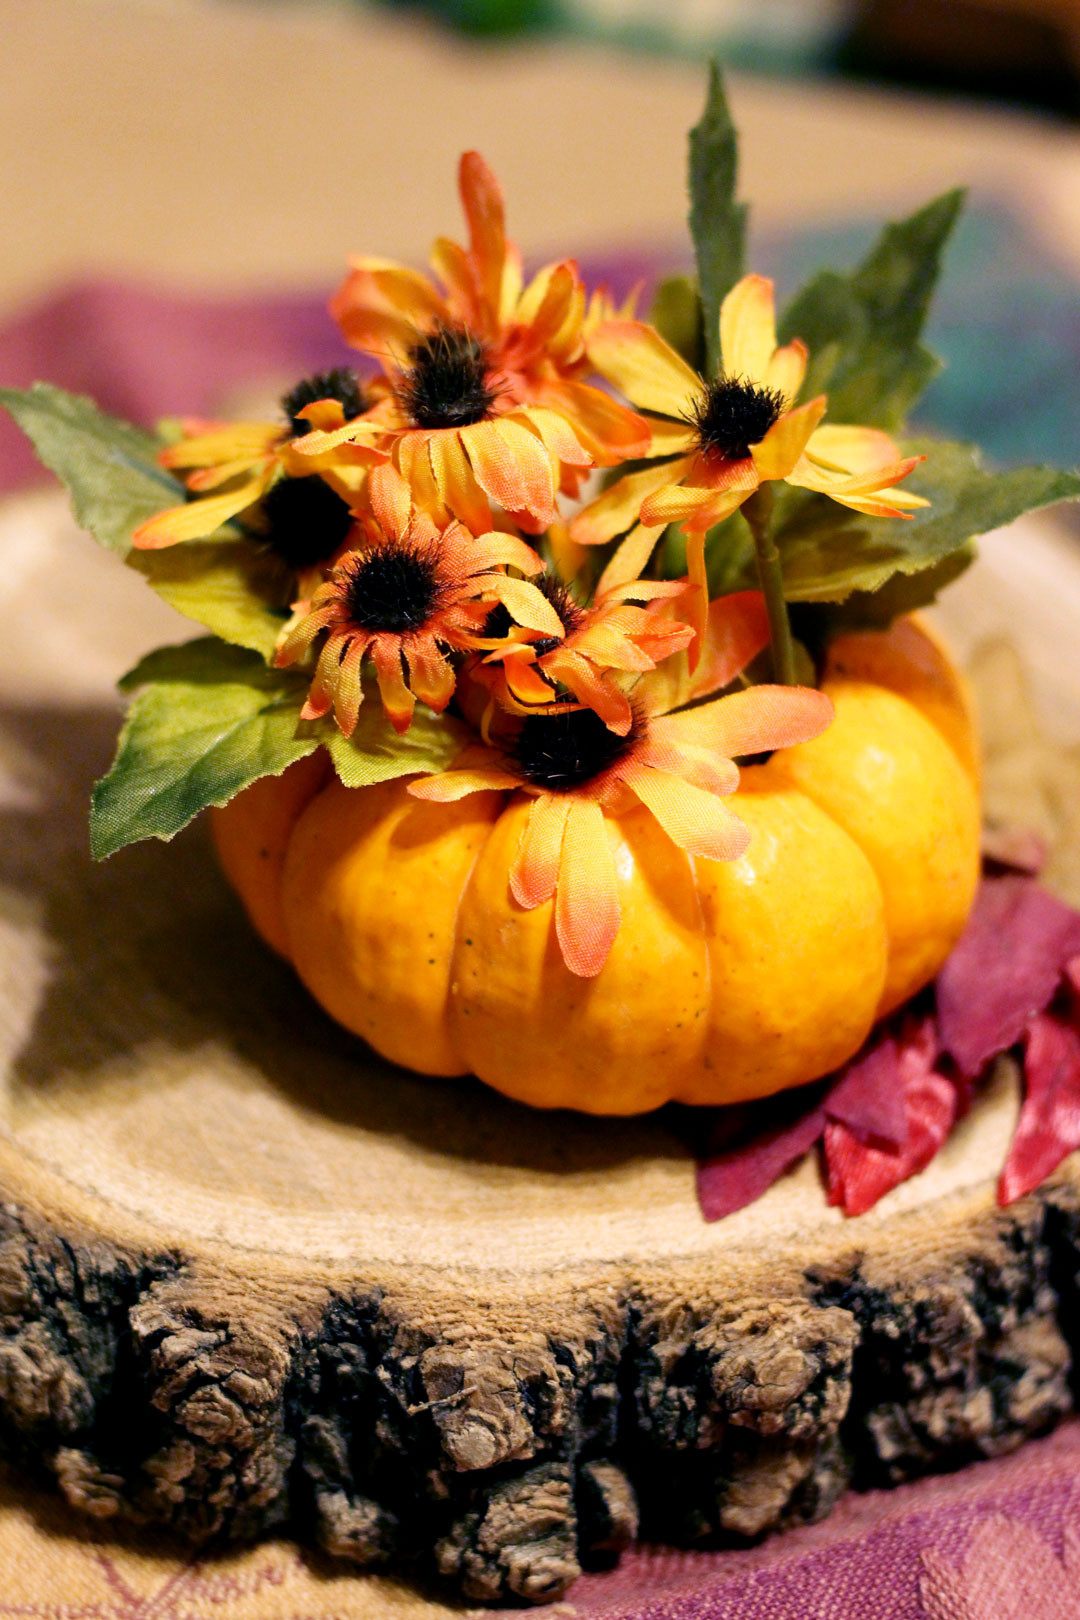 Simple Thanksgiving Table Decorations
 Make easy Thanksgiving table decorations or favors from